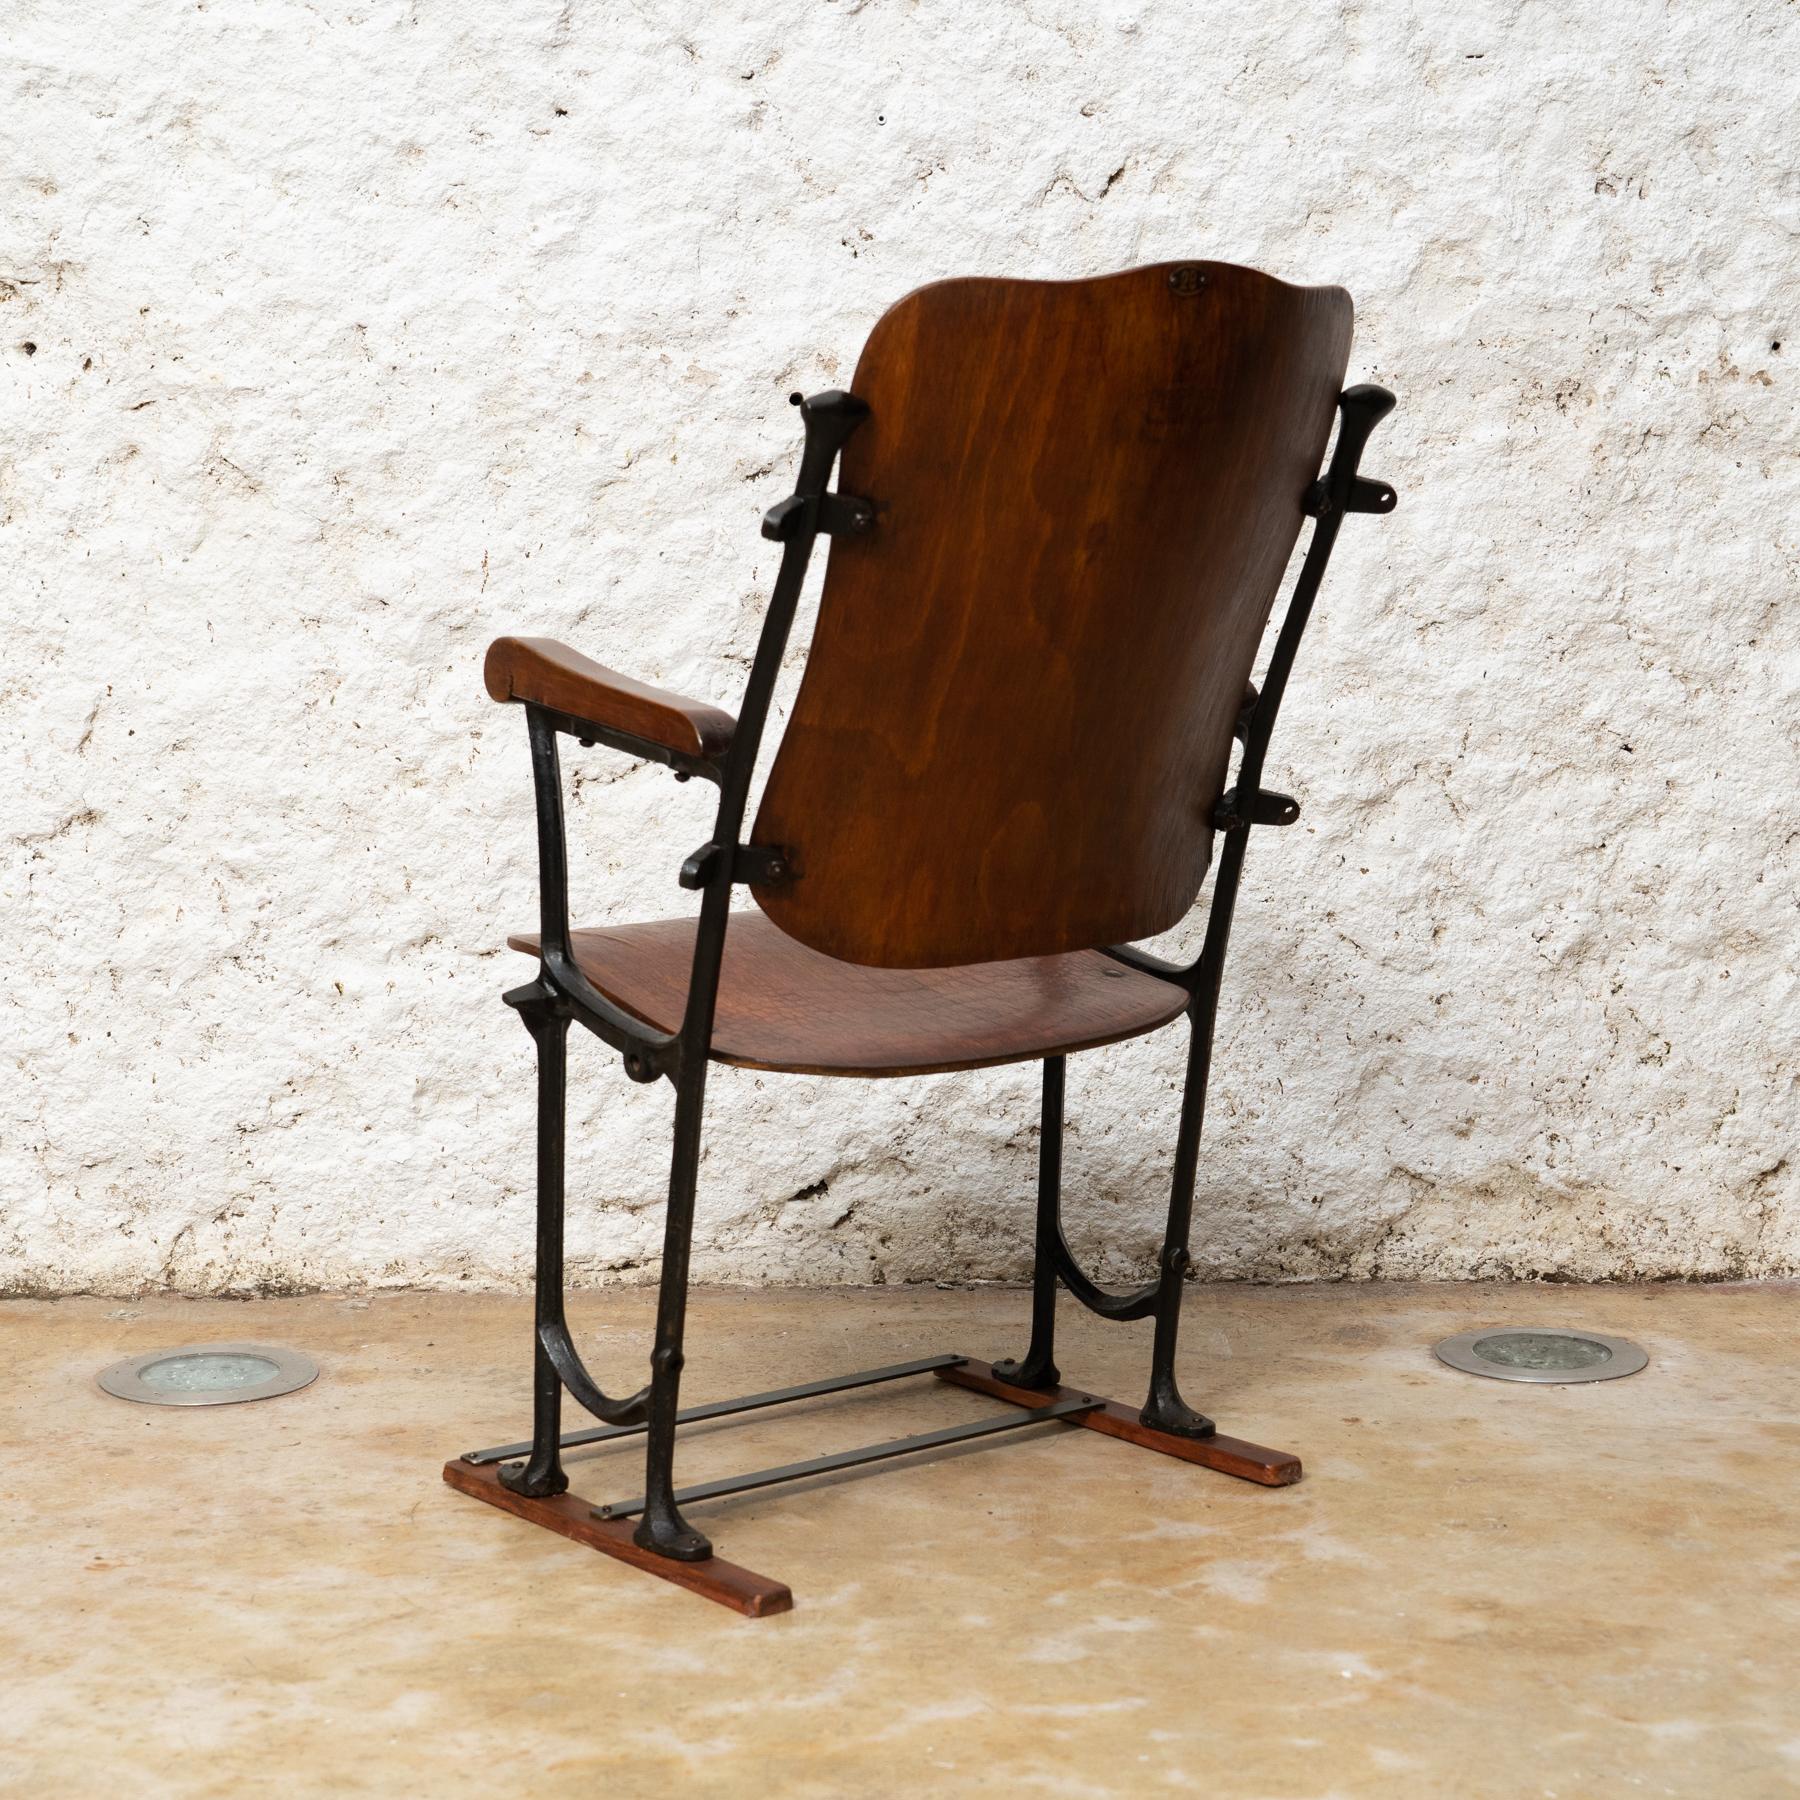 Elegance in Time: Catalan Modernism Theater Chair 'Kursaal', c. 1930 In Good Condition For Sale In Barcelona, Barcelona